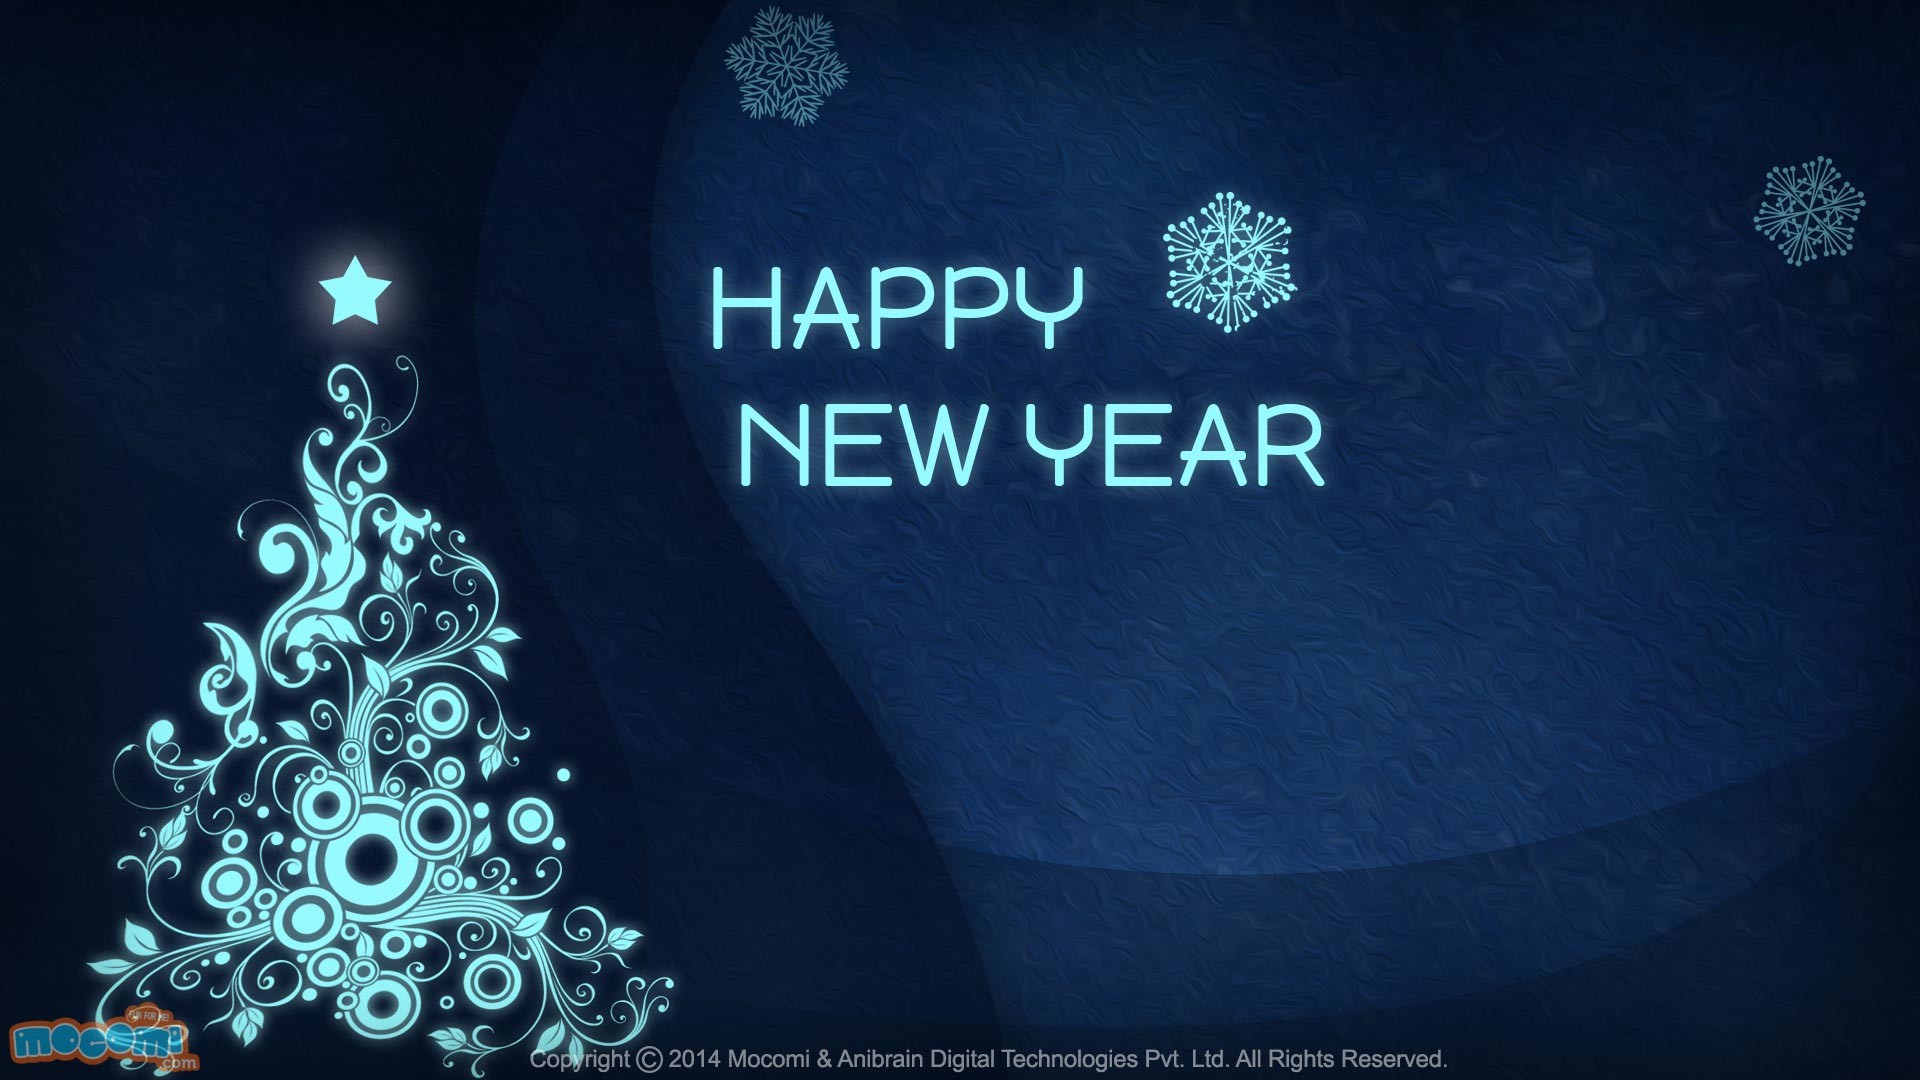 New Year Wallpapers for Desktop (60+ images)